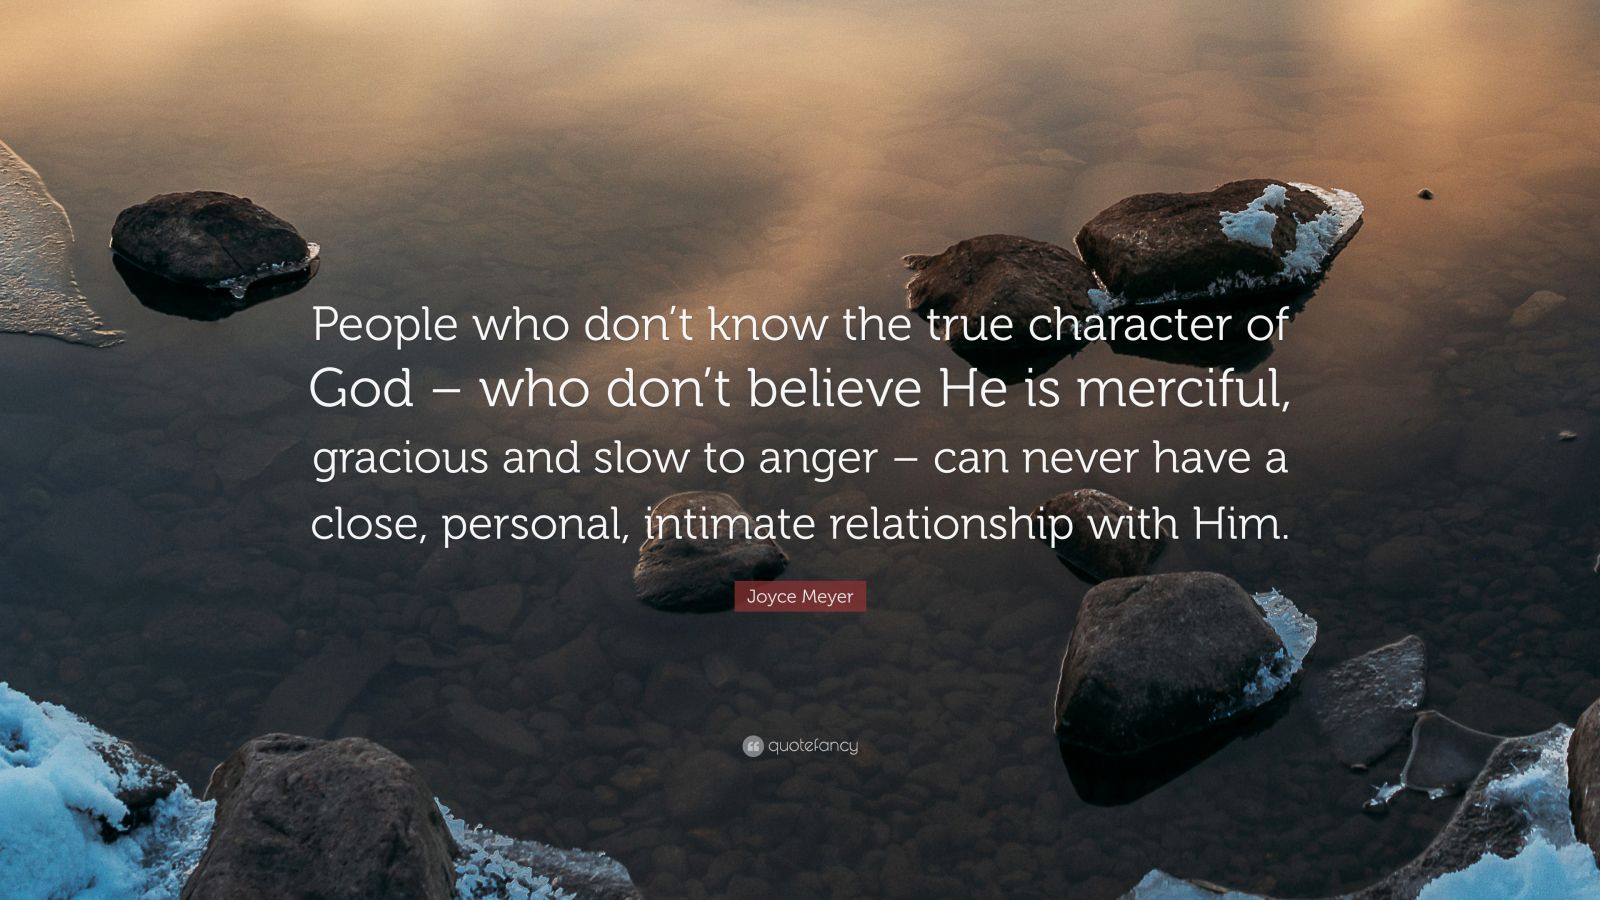 Joyce Meyer Quote: “People who don’t know the true ...